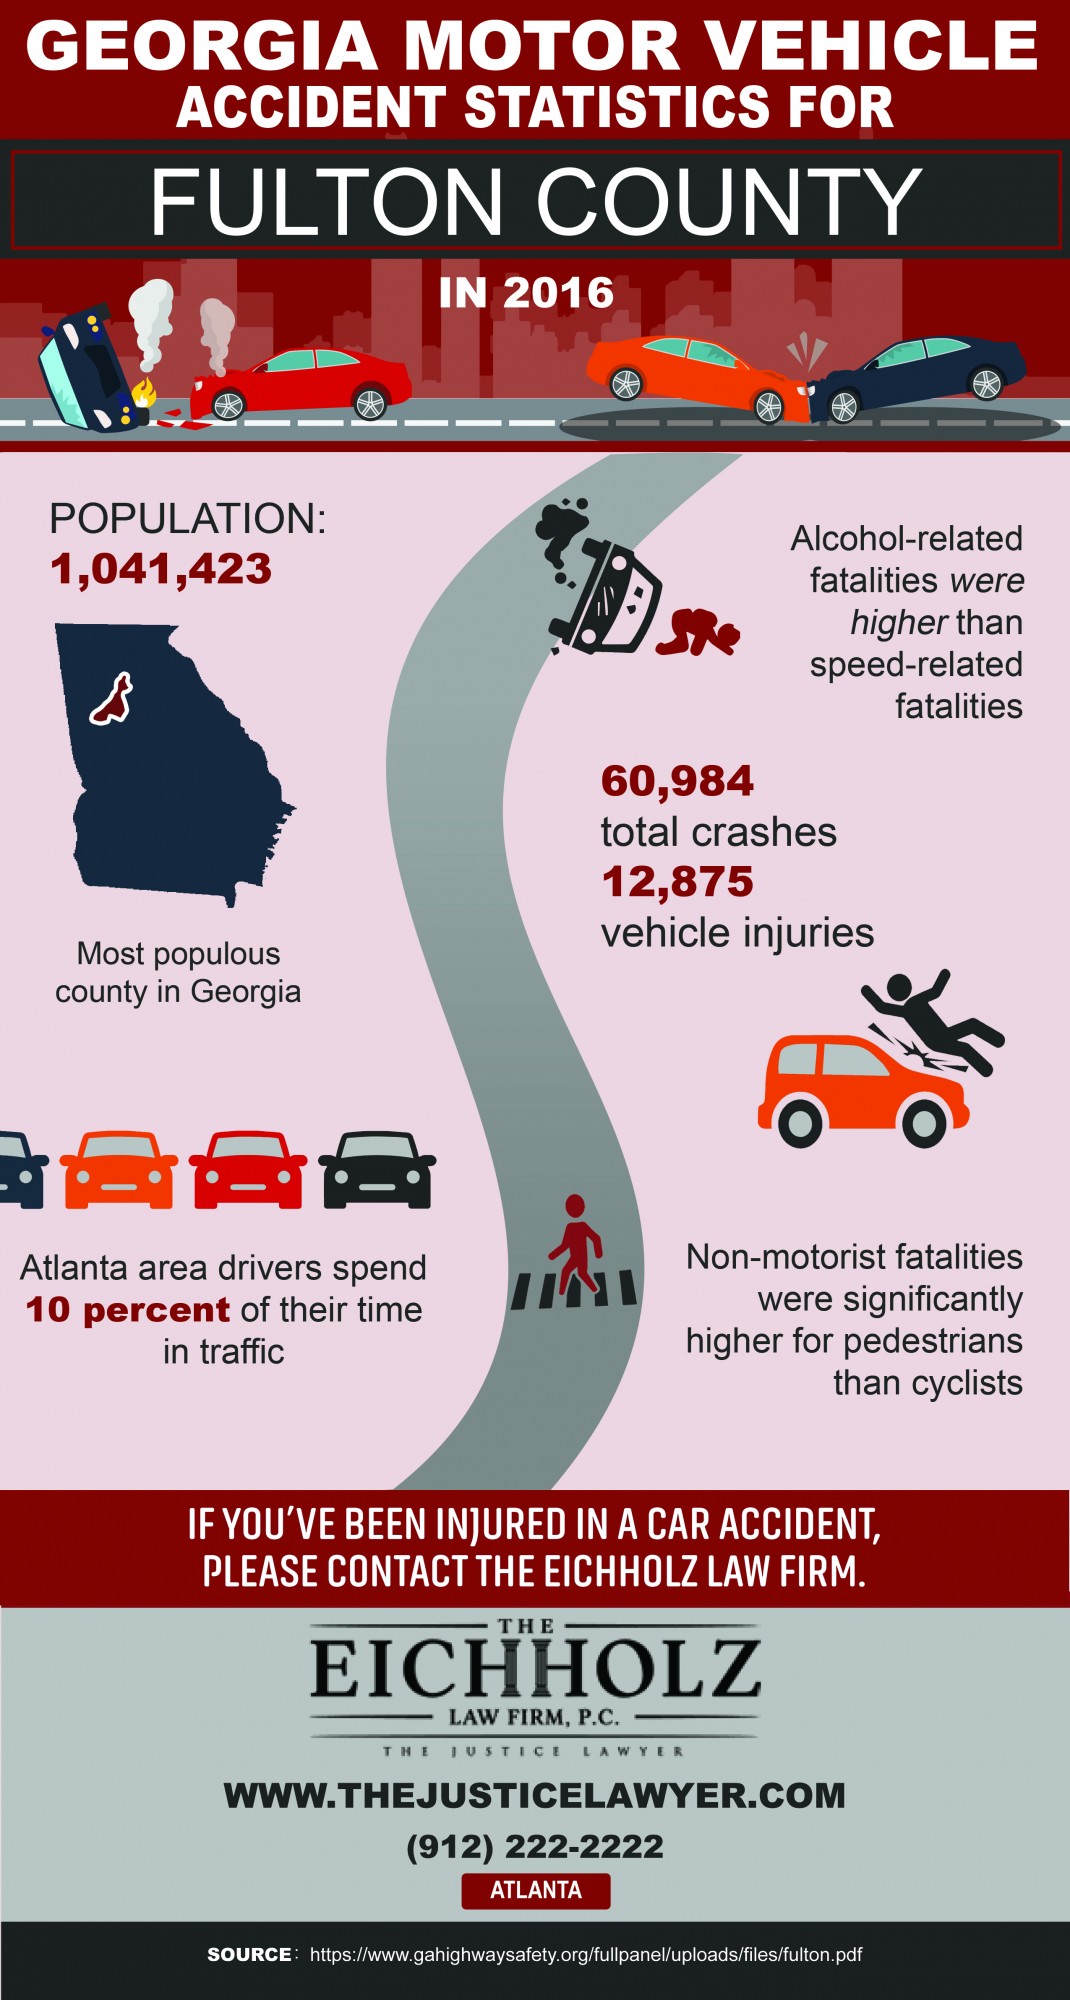 Fulton County Traffic Accident Statistics - The Eichholz Law Firm